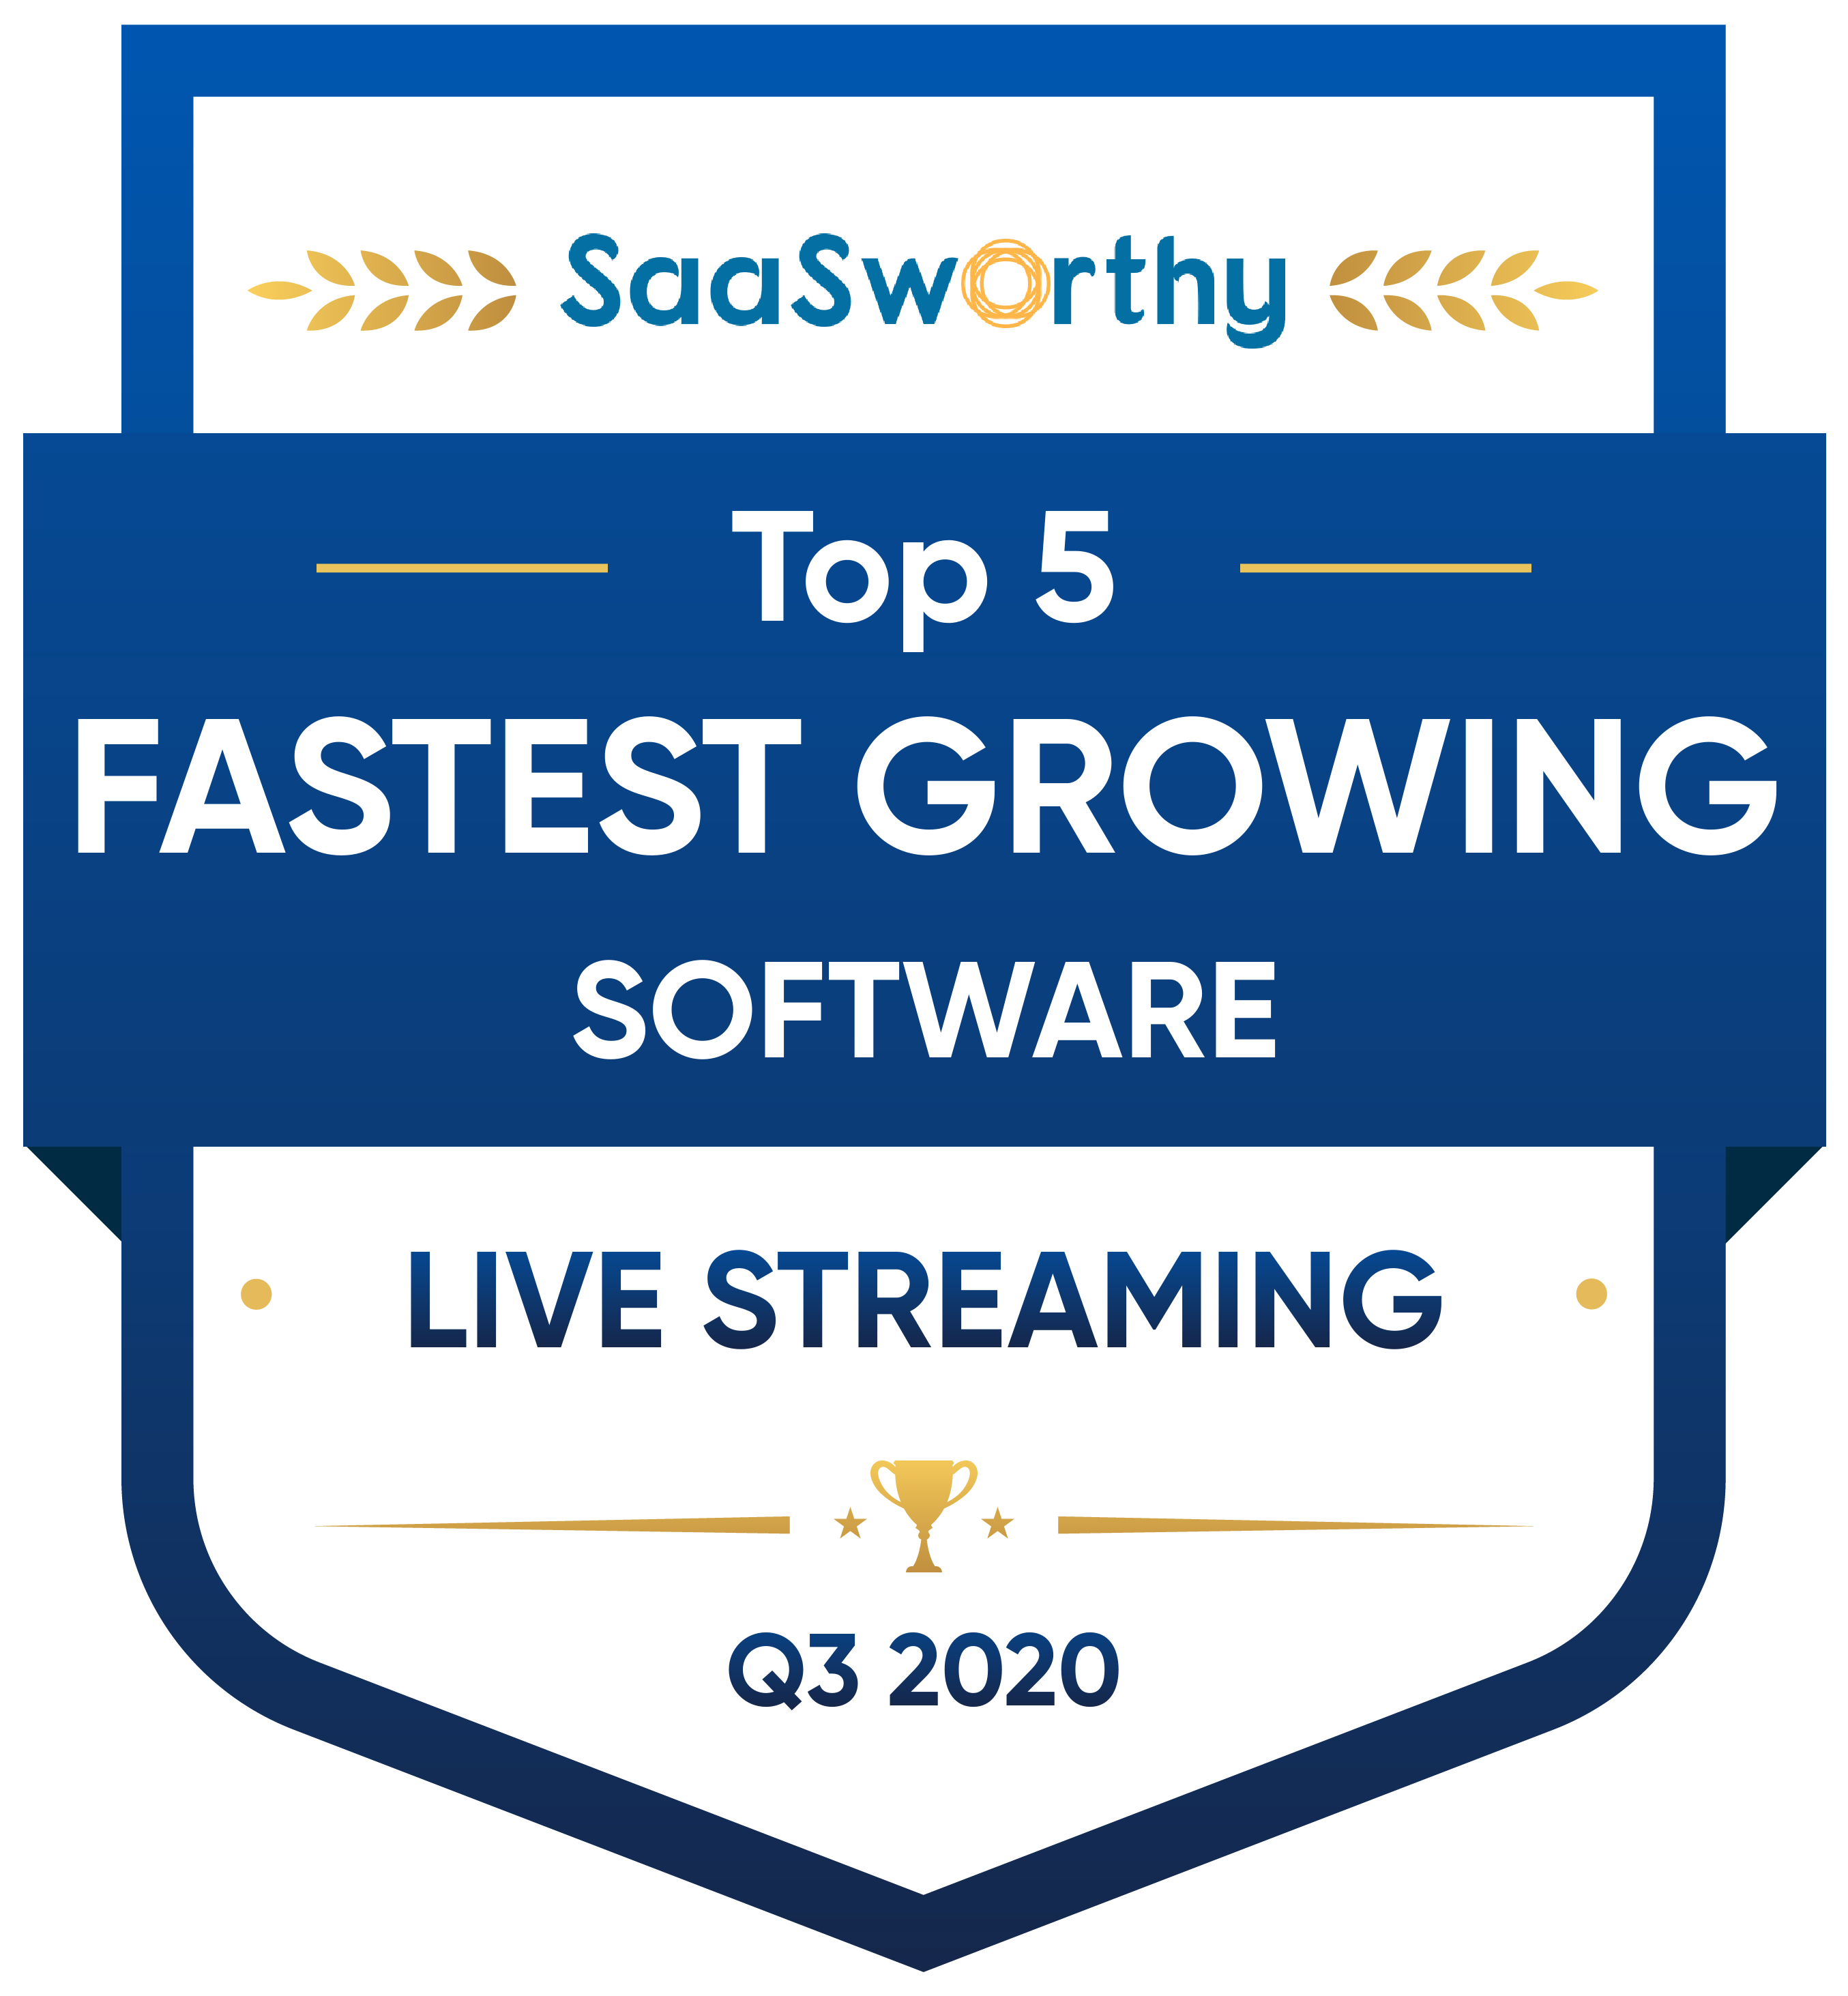 SaaSworthy Top 5 Fastest Growing Software, Live Streaming, Q3 2020